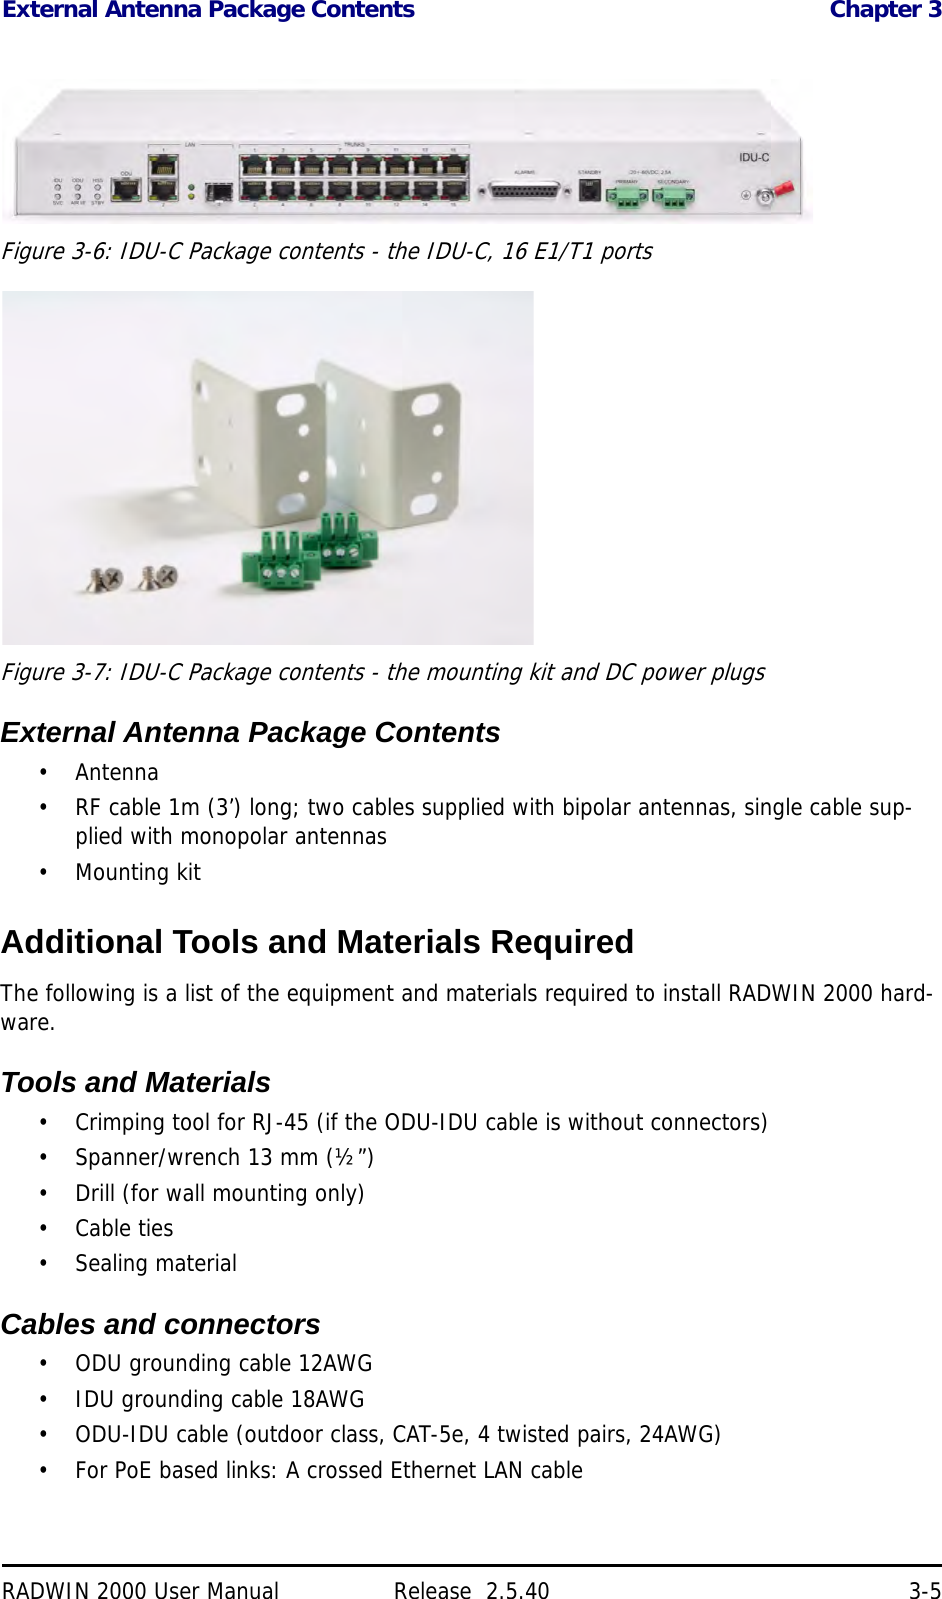 External Antenna Package Contents Chapter 3RADWIN 2000 User Manual Release  2.5.40 3-5Figure 3-6: IDU-C Package contents - the IDU-C, 16 E1/T1 portsFigure 3-7: IDU-C Package contents - the mounting kit and DC power plugsExternal Antenna Package Contents• Antenna• RF cable 1m (3’) long; two cables supplied with bipolar antennas, single cable sup-plied with monopolar antennas• Mounting kitAdditional Tools and Materials RequiredThe following is a list of the equipment and materials required to install RADWIN 2000 hard-ware.Tools and Materials• Crimping tool for RJ-45 (if the ODU-IDU cable is without connectors)• Spanner/wrench 13 mm (½”) • Drill (for wall mounting only)•Cable ties• Sealing materialCables and connectors• ODU grounding cable 12AWG• IDU grounding cable 18AWG• ODU-IDU cable (outdoor class, CAT-5e, 4 twisted pairs, 24AWG)• For PoE based links: A crossed Ethernet LAN cable